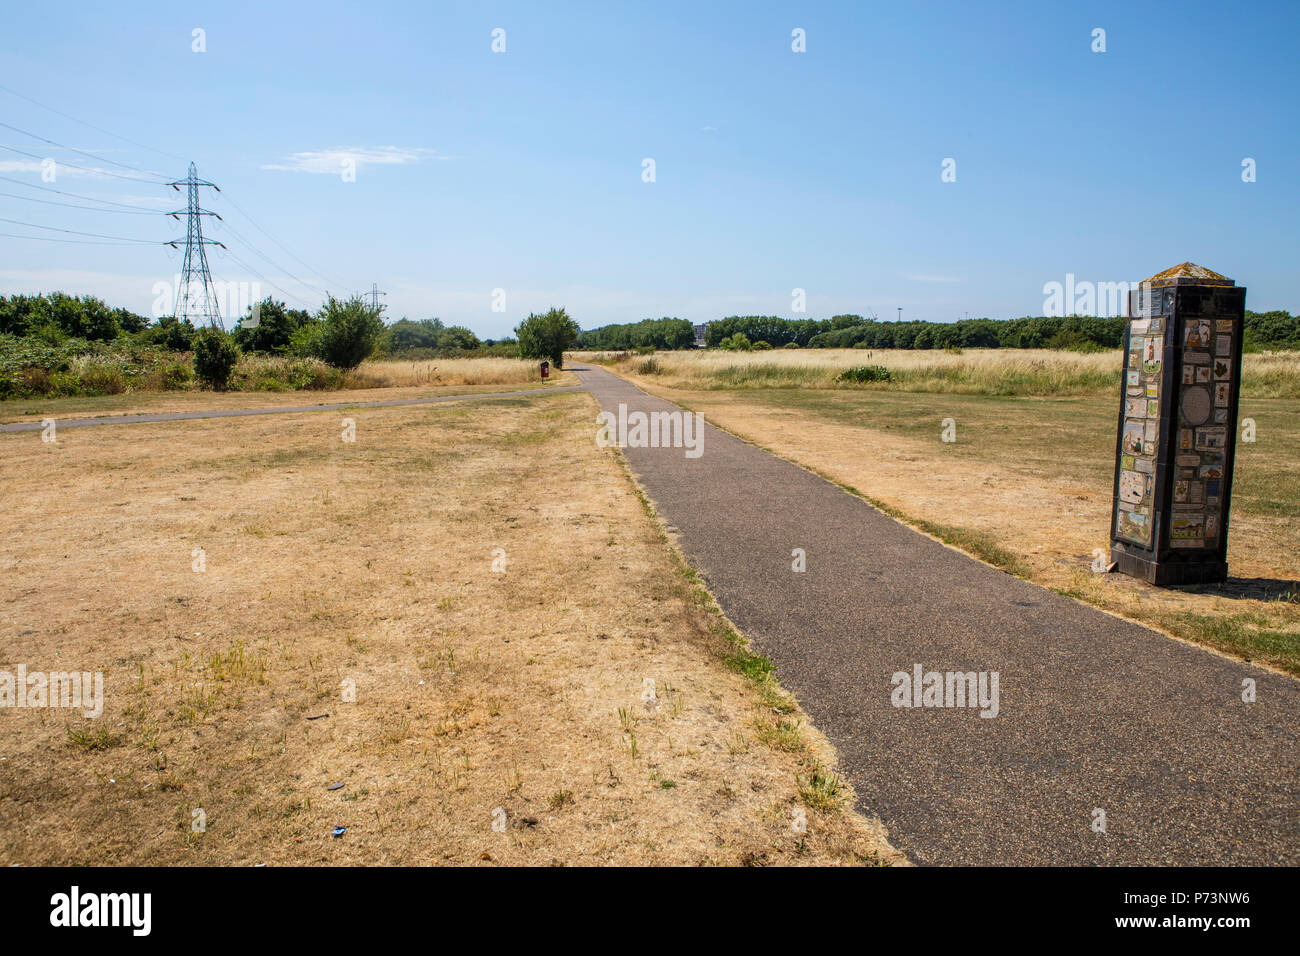 A view of Tottenham Marshes in Tottenham, London, UK. The marshes are part of the Lee Valley Park. Stock Photo